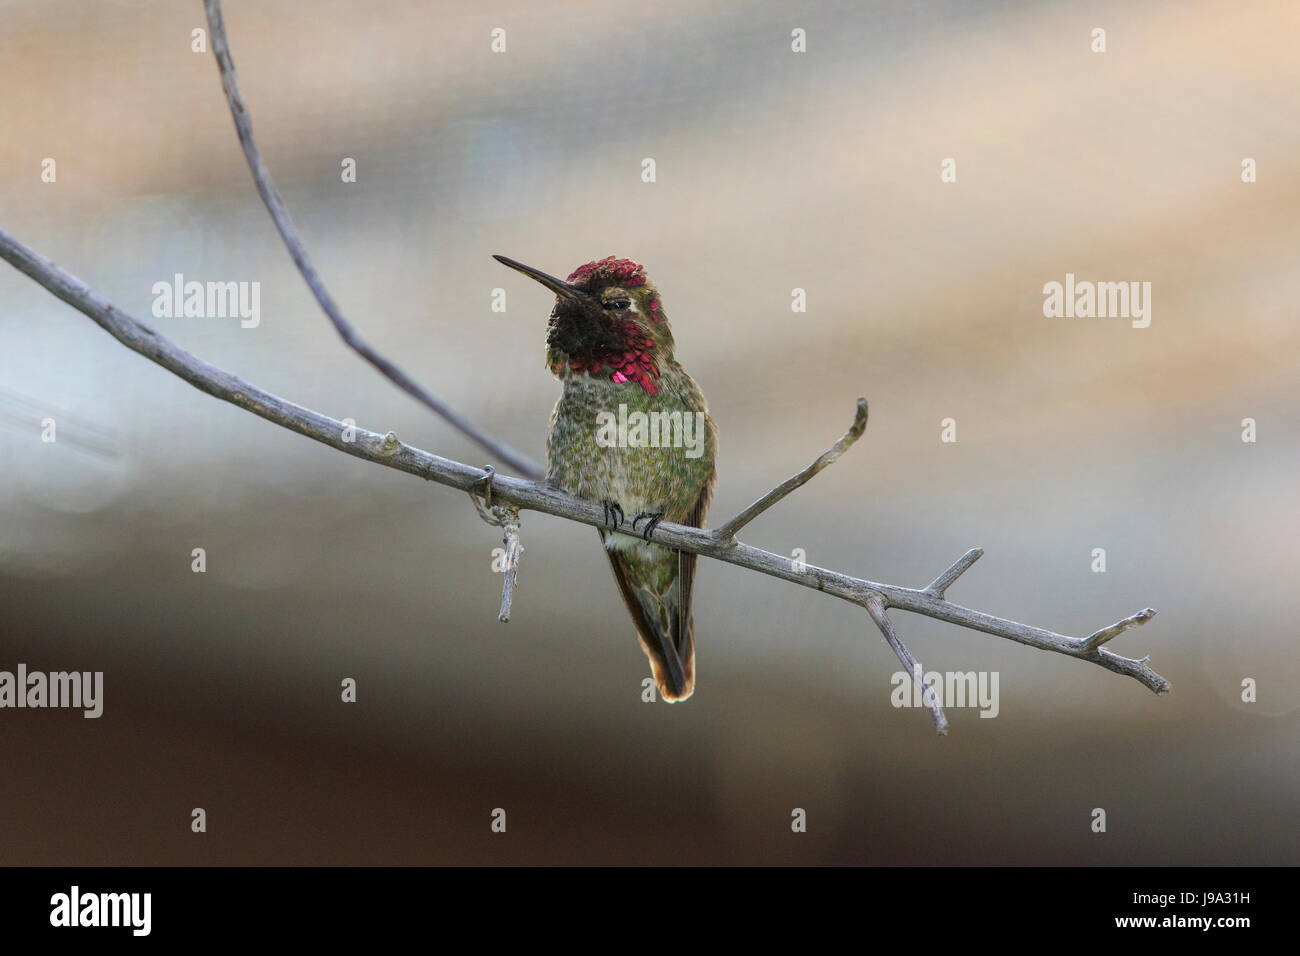 Anna's hummingbird (Calypte anna) perched on tree branch. Stock Photo